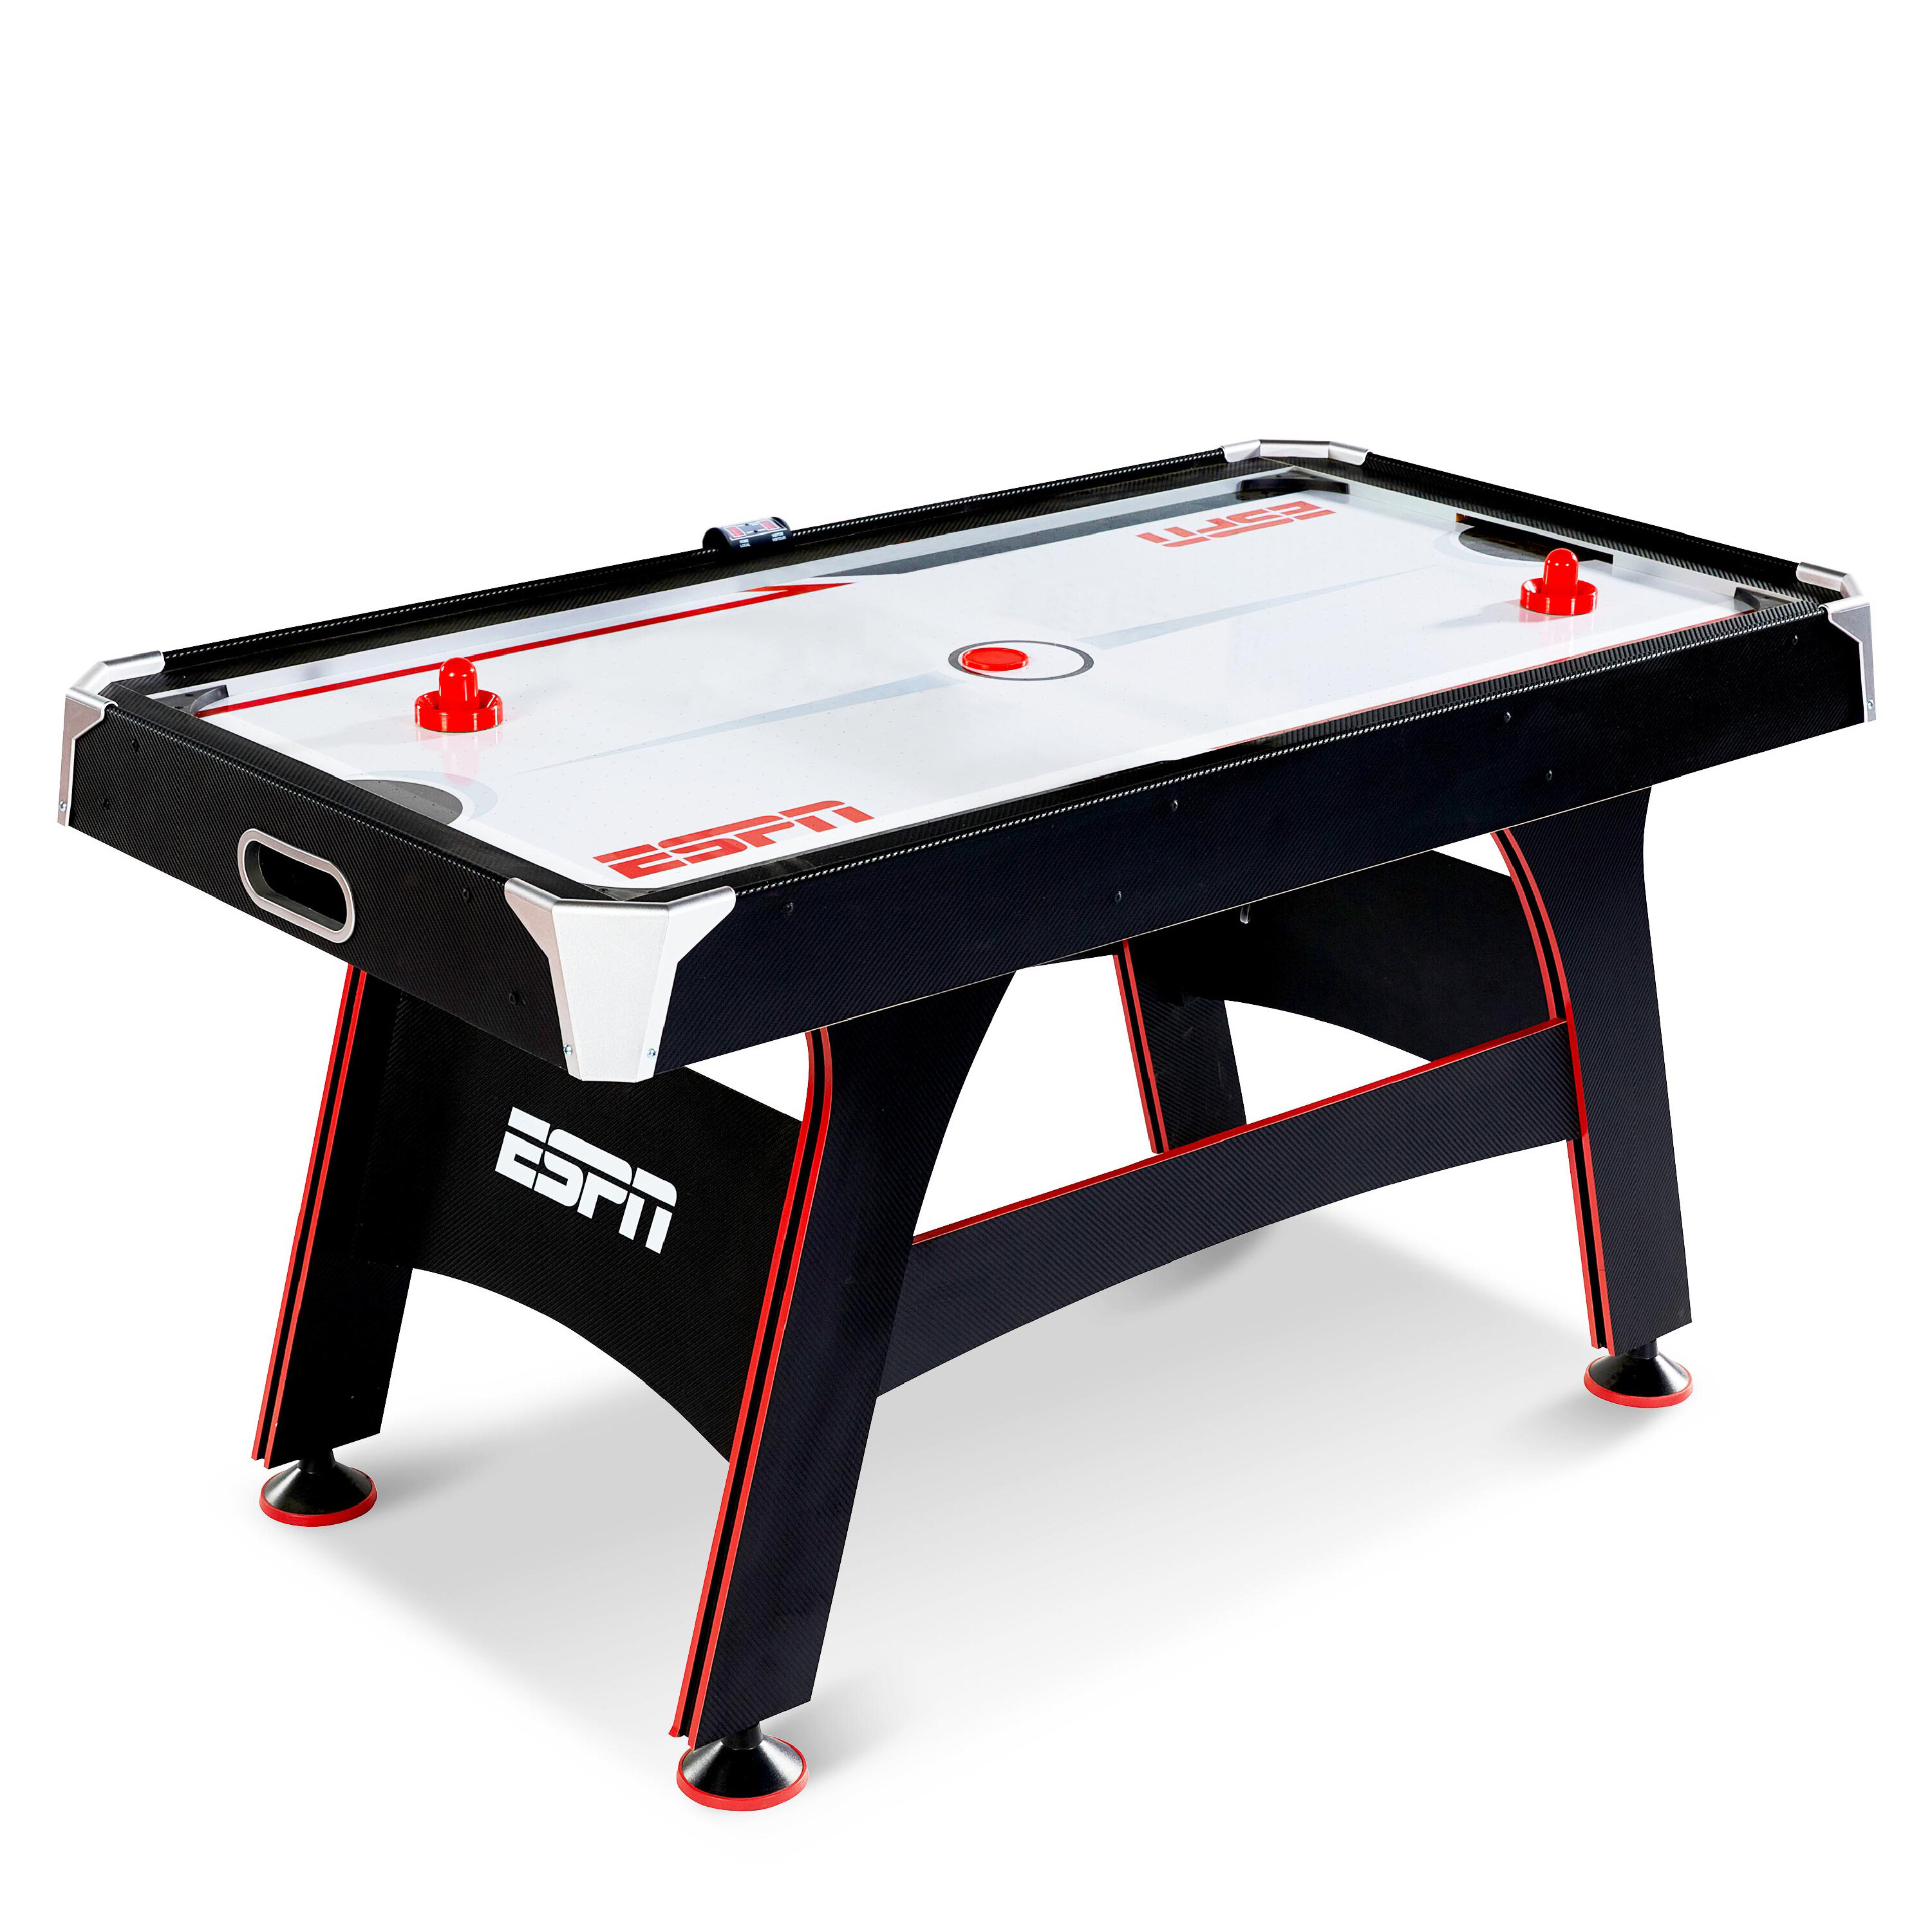 Espn 5 Two Player Air Hockey Table With Digital Scoreboard And